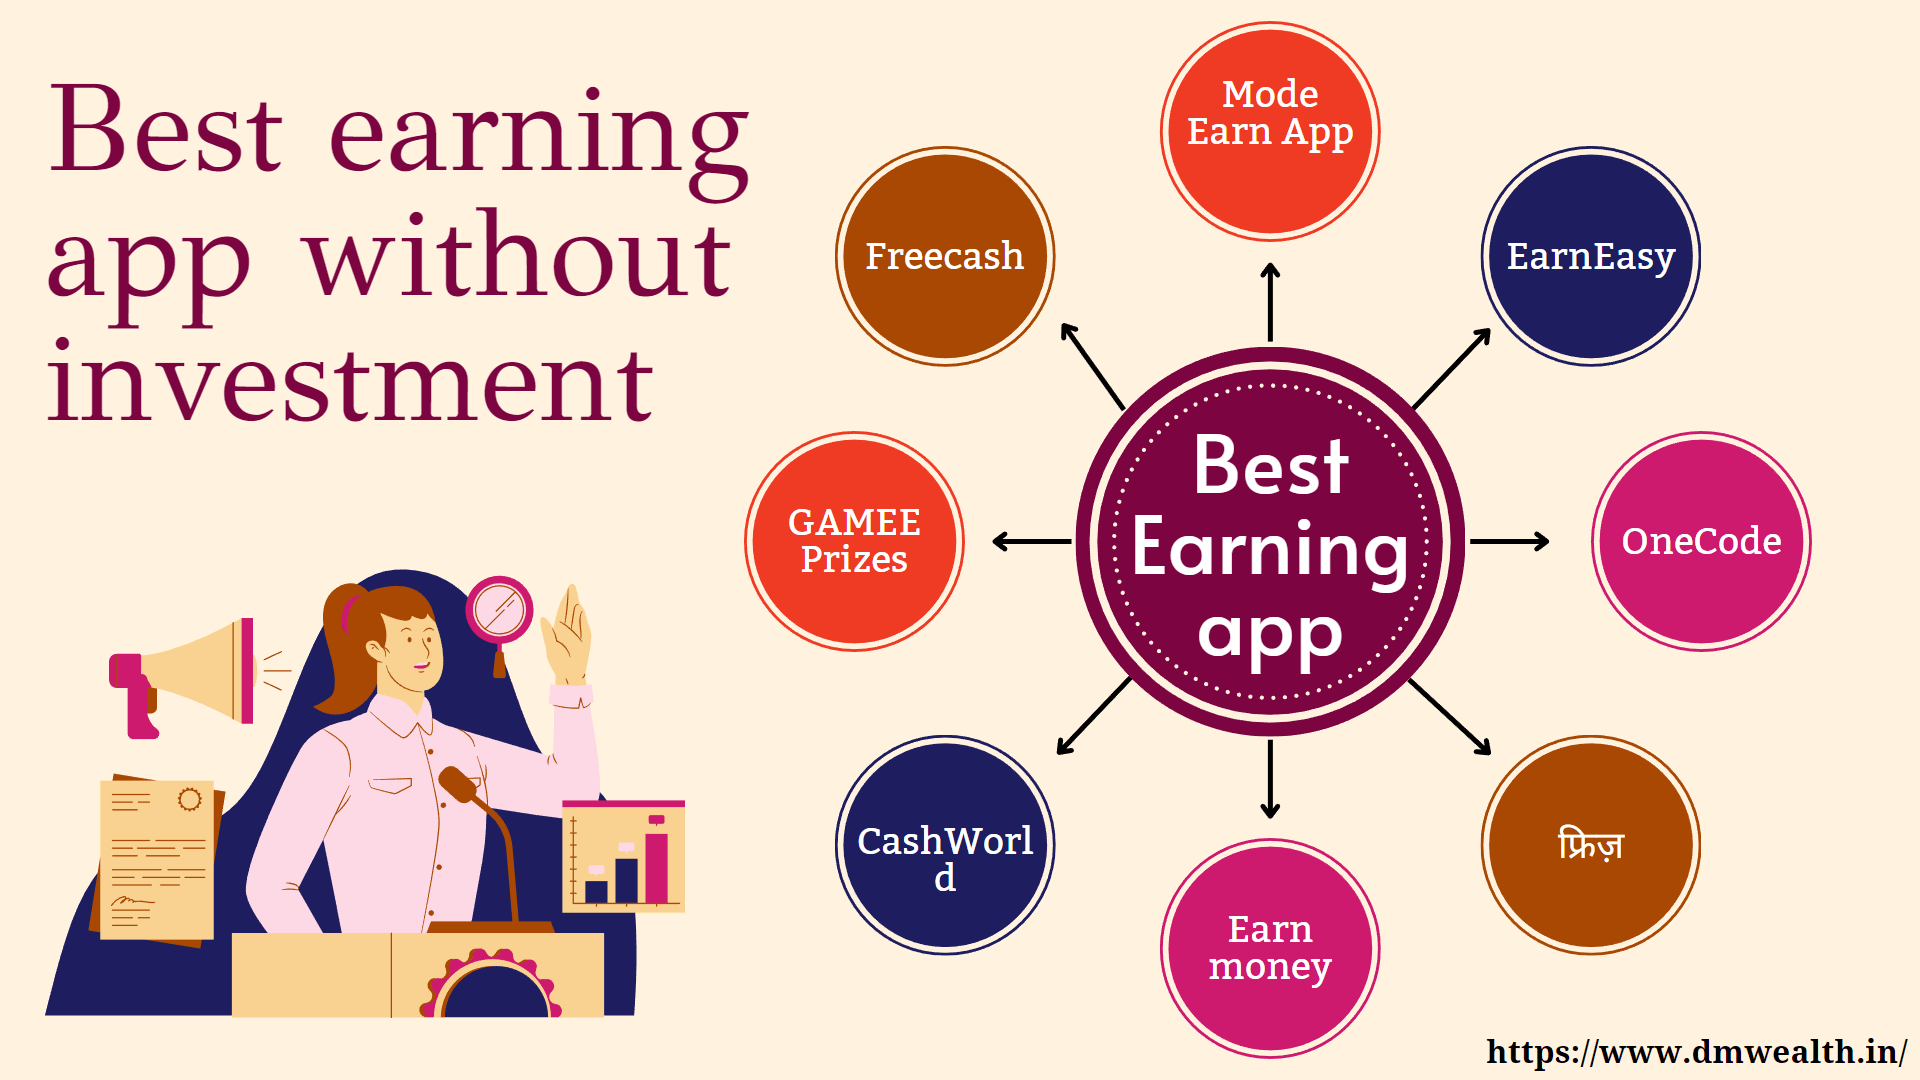 Best earning app without investment